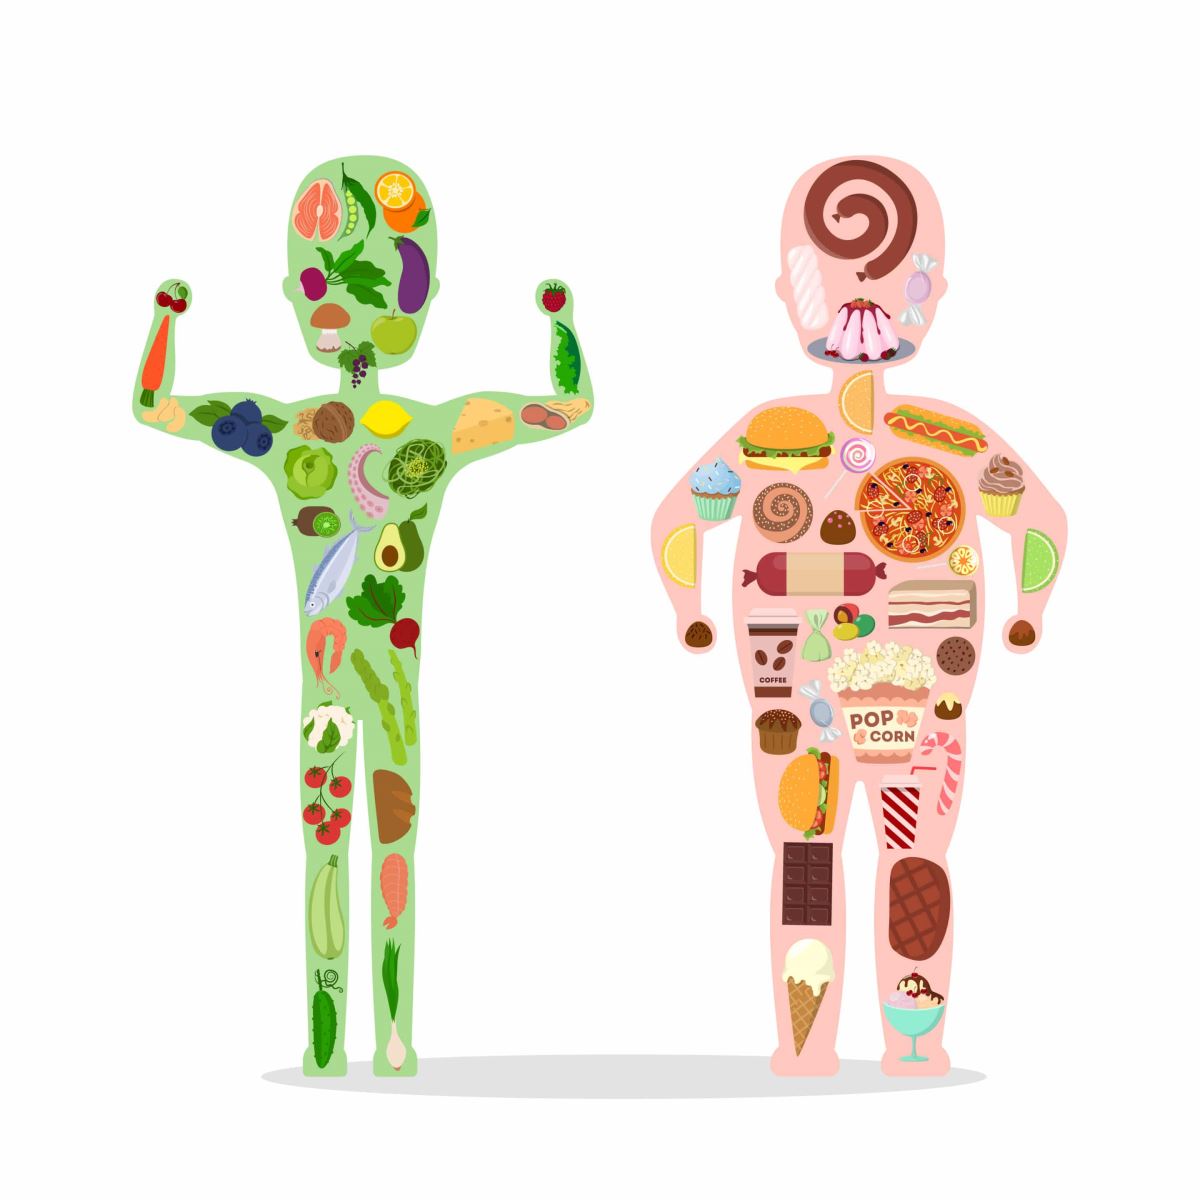 Body type illustration of healthy individual  who consumes good fats next to body type illustration of unhealthy overweight individual who consumes bad fats